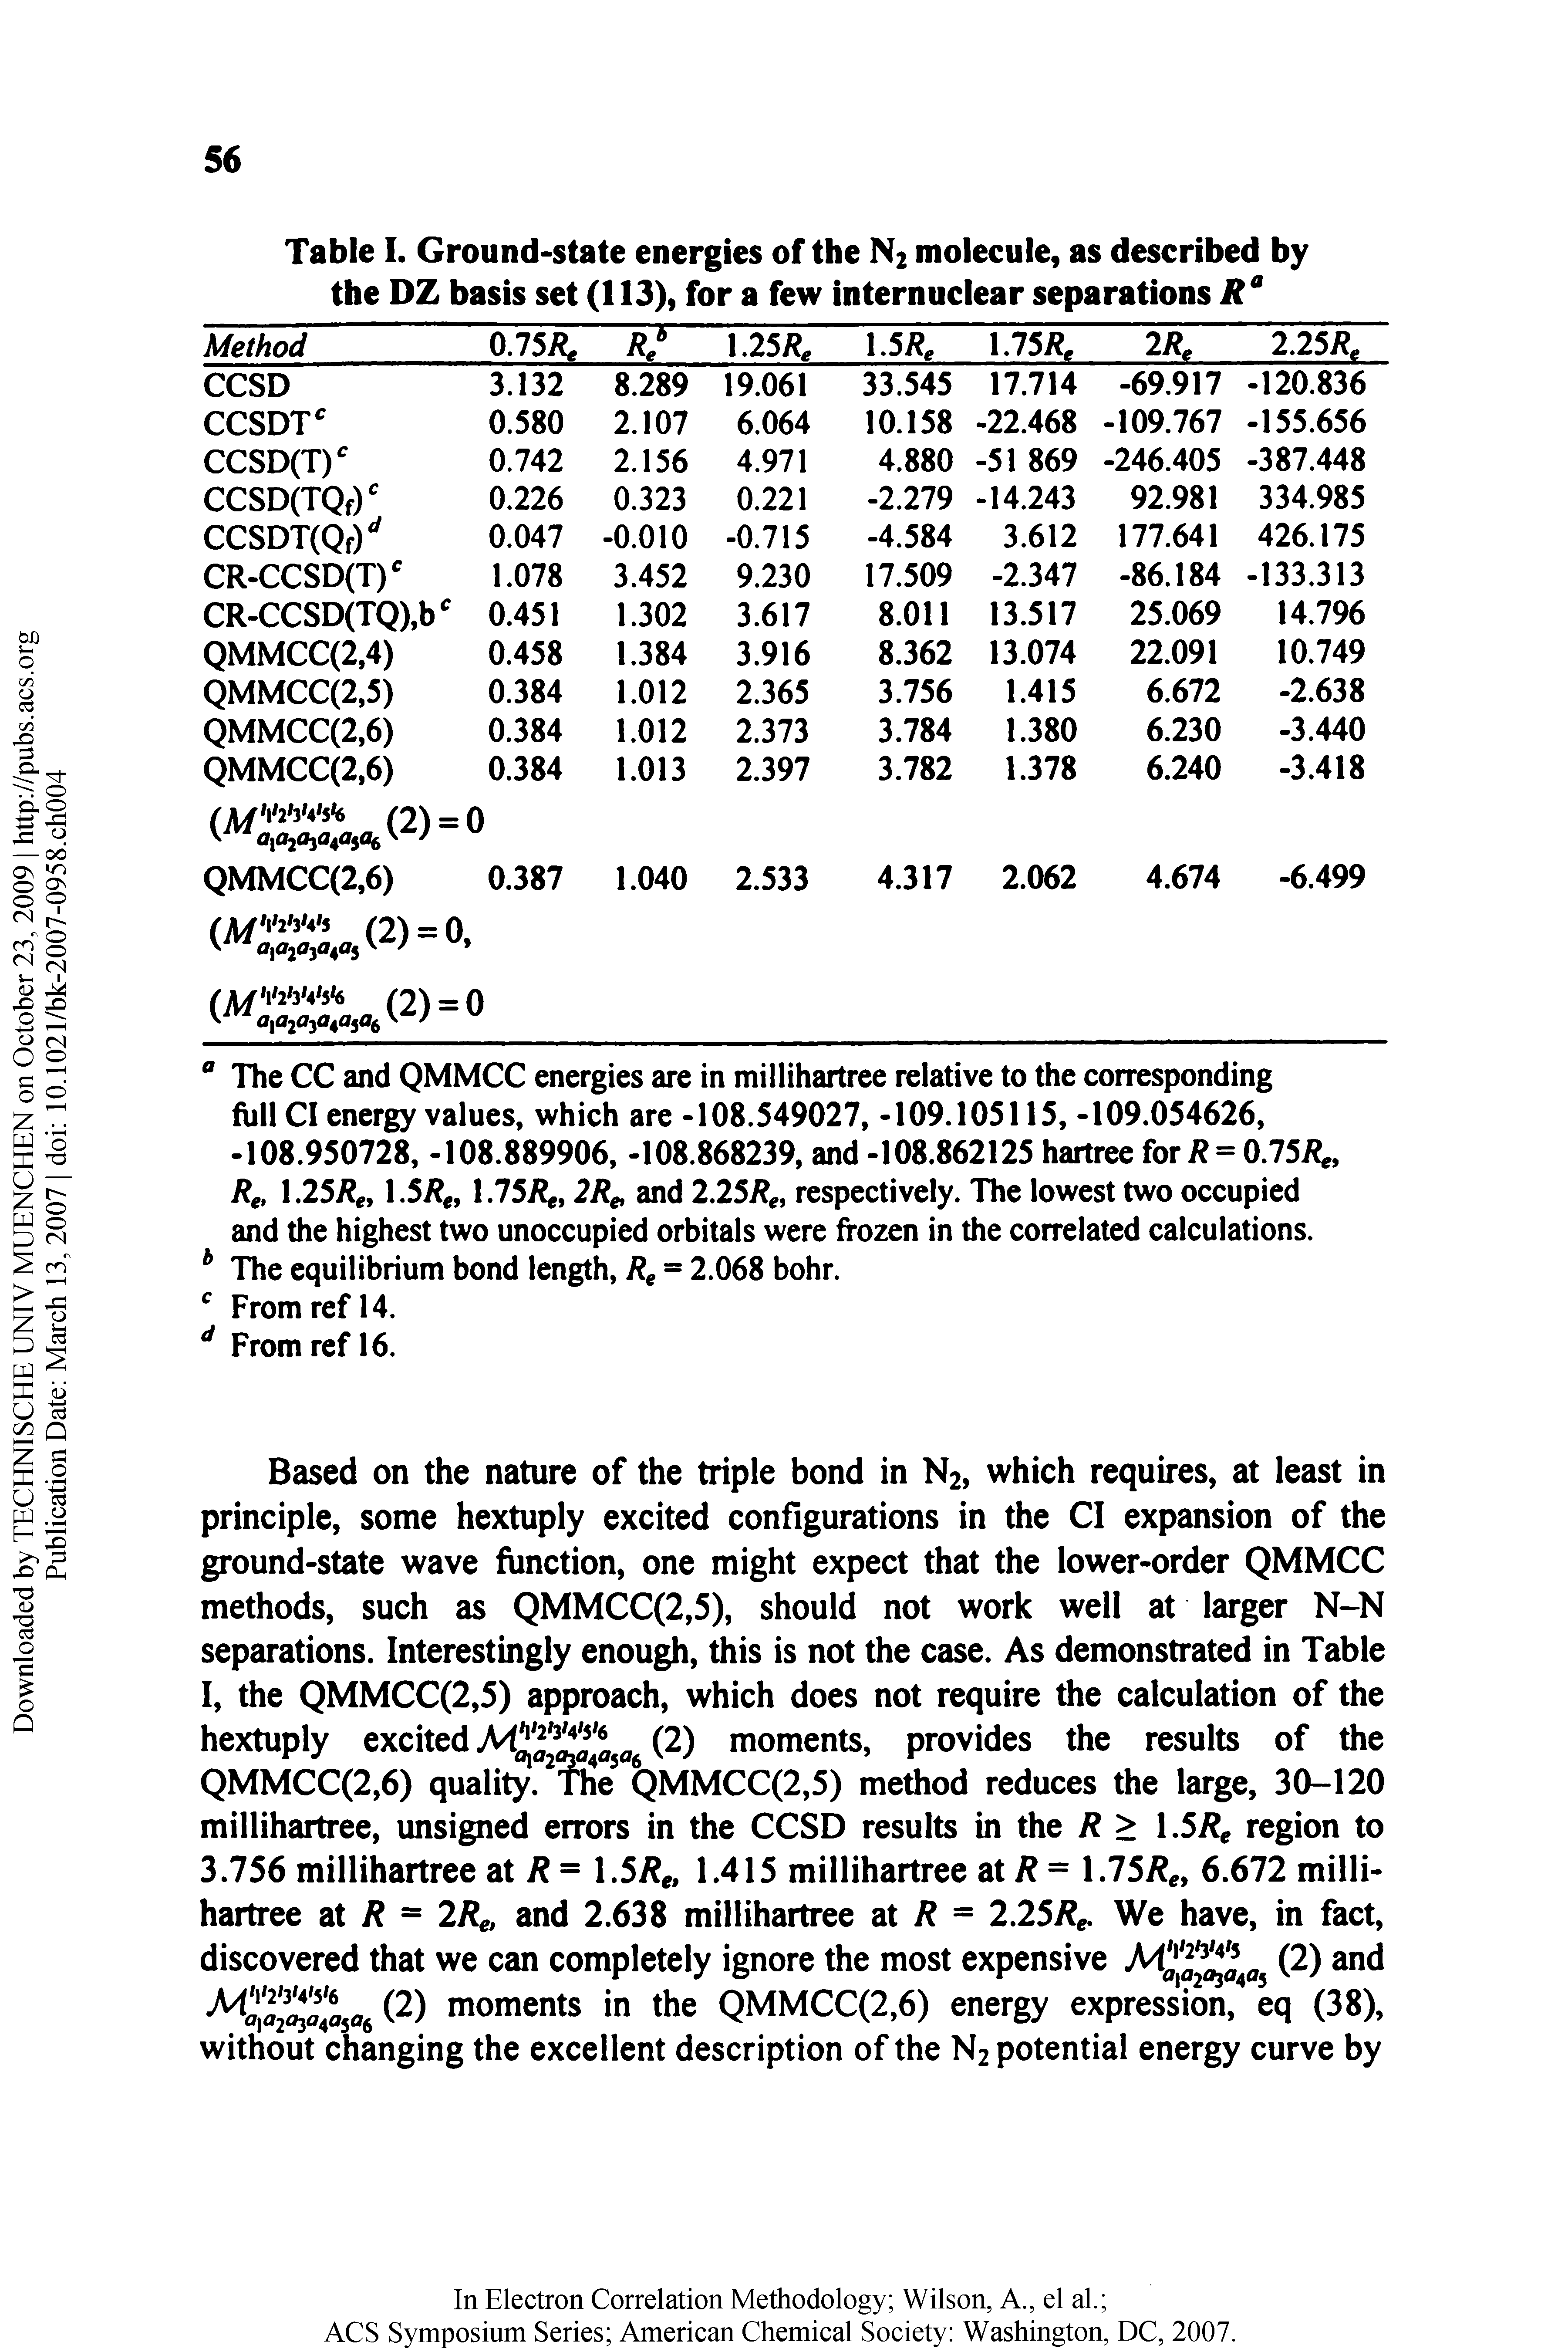 Table I. Ground-state energies of the N2 molecule, as described by the DZ basis set (113), for a few internuclear separations...